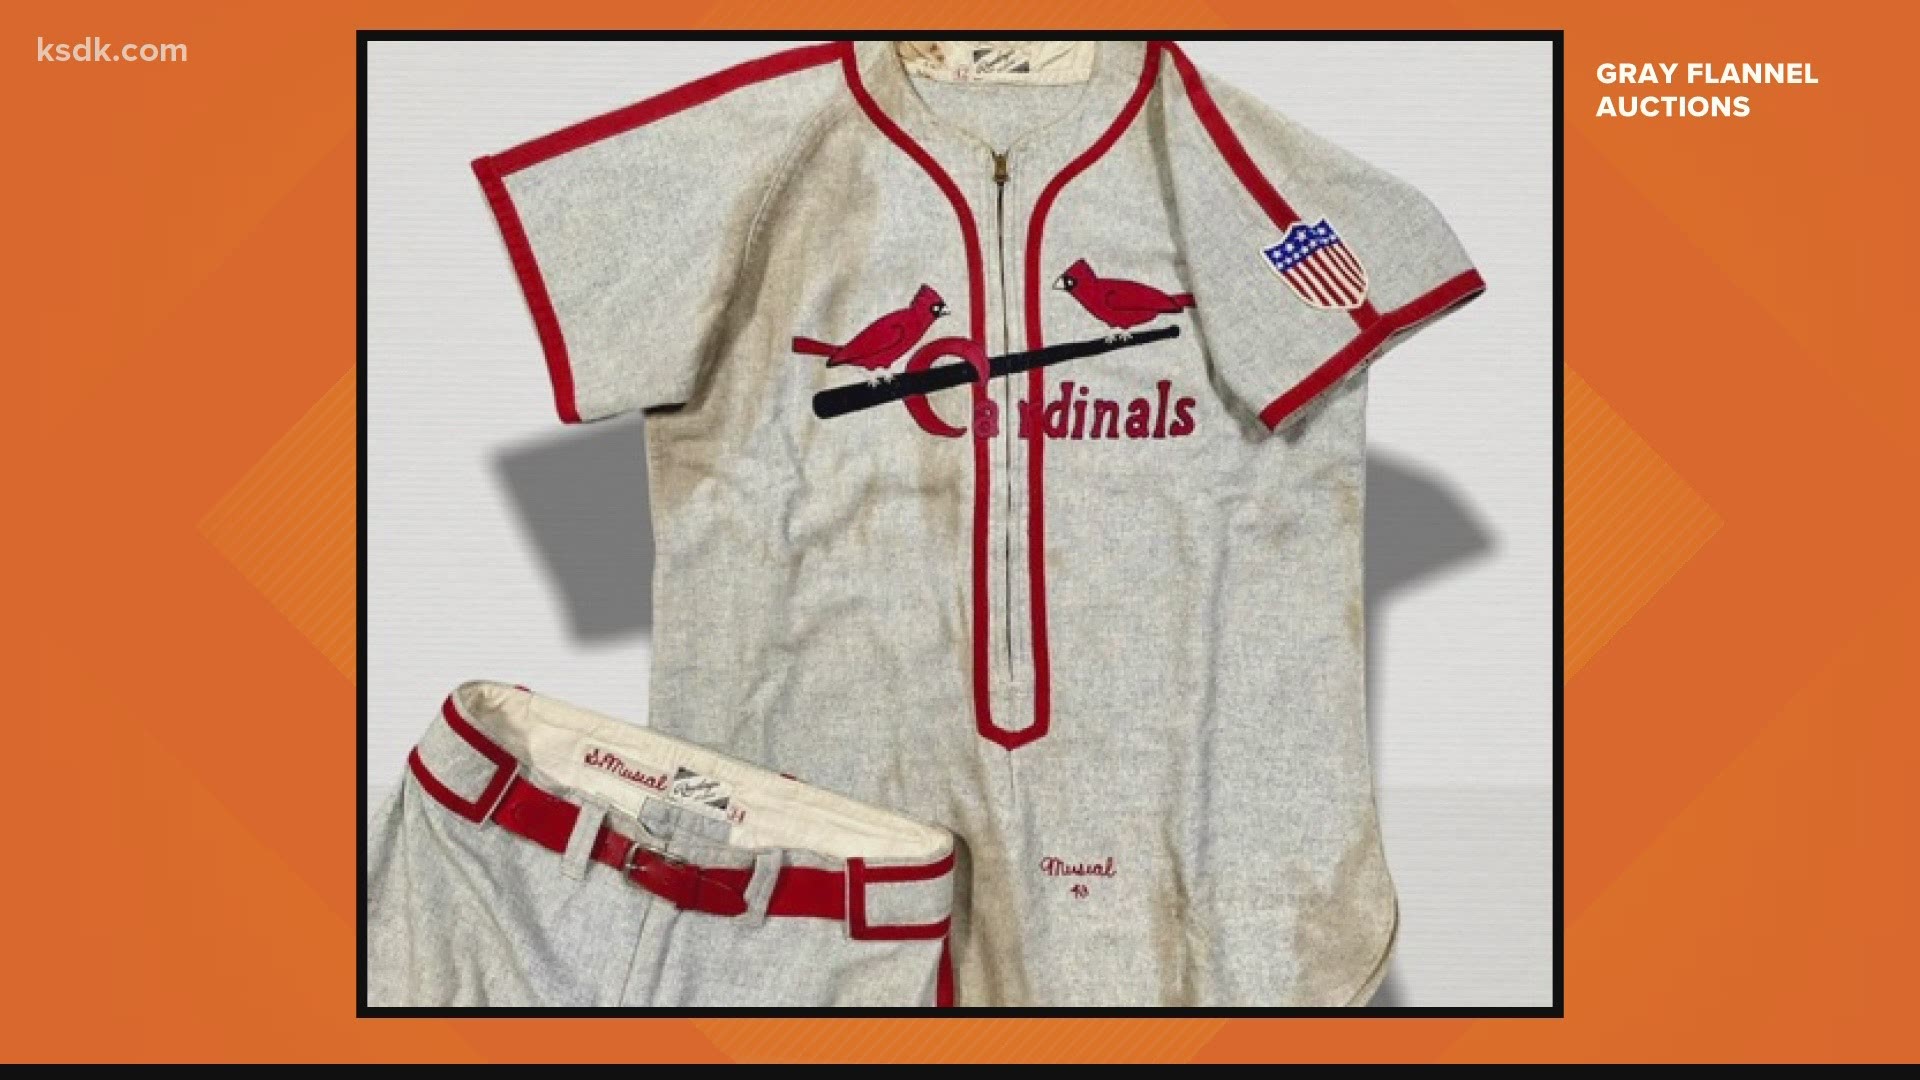 Bidding on the uniform began at $10,000. As of Monday afternoon, the current bid sits at $96,800